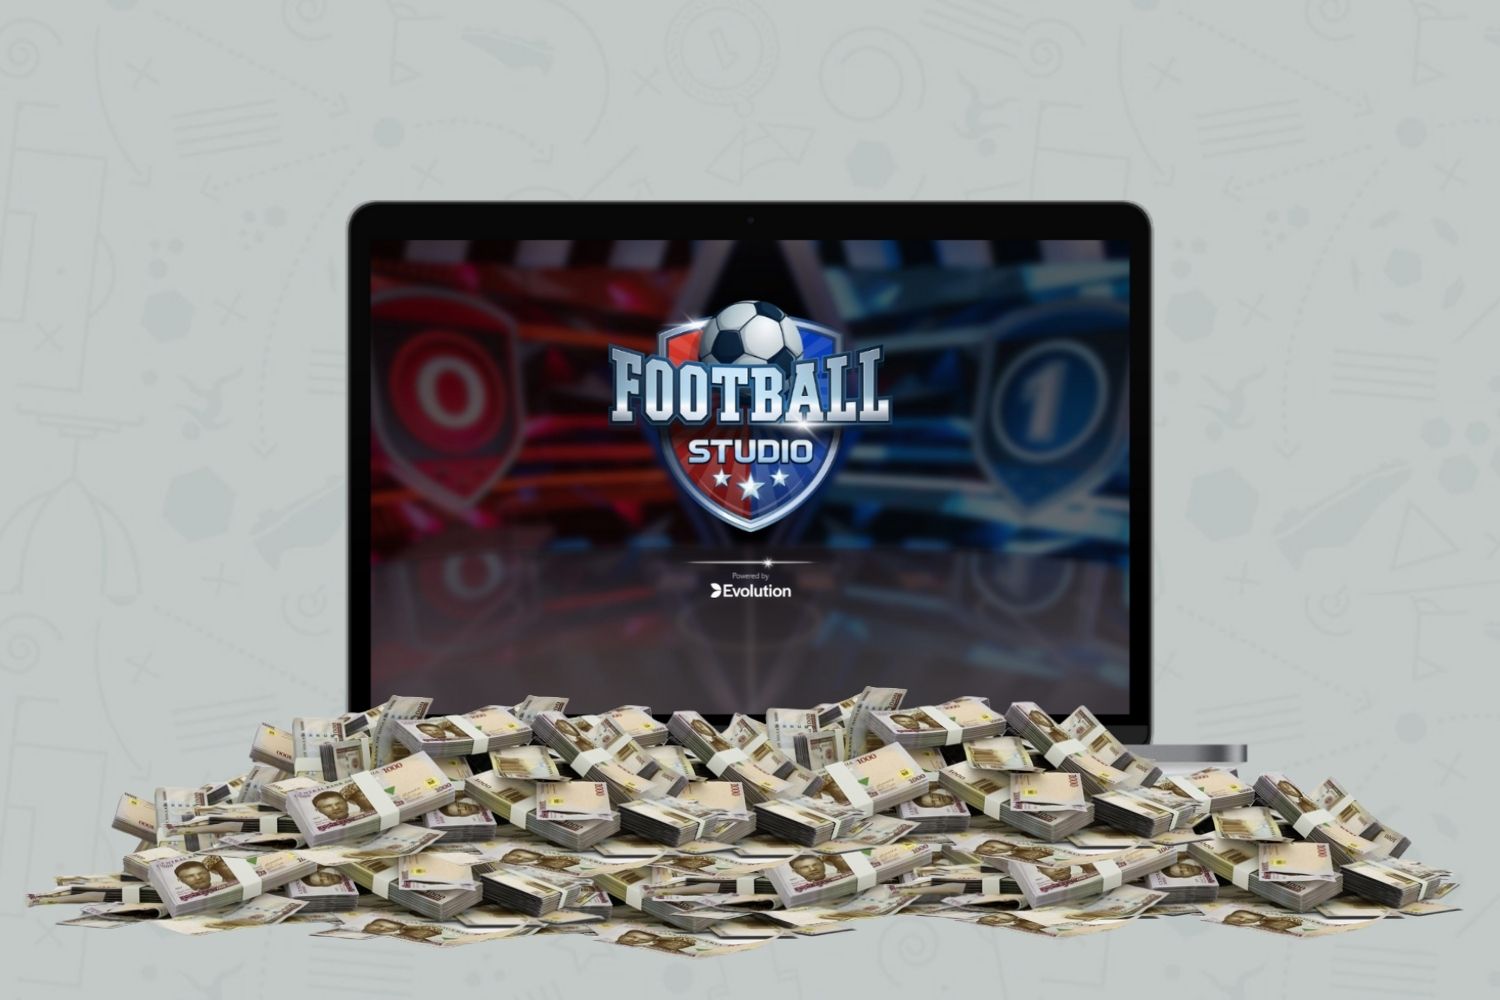 How to win big with Football Studio